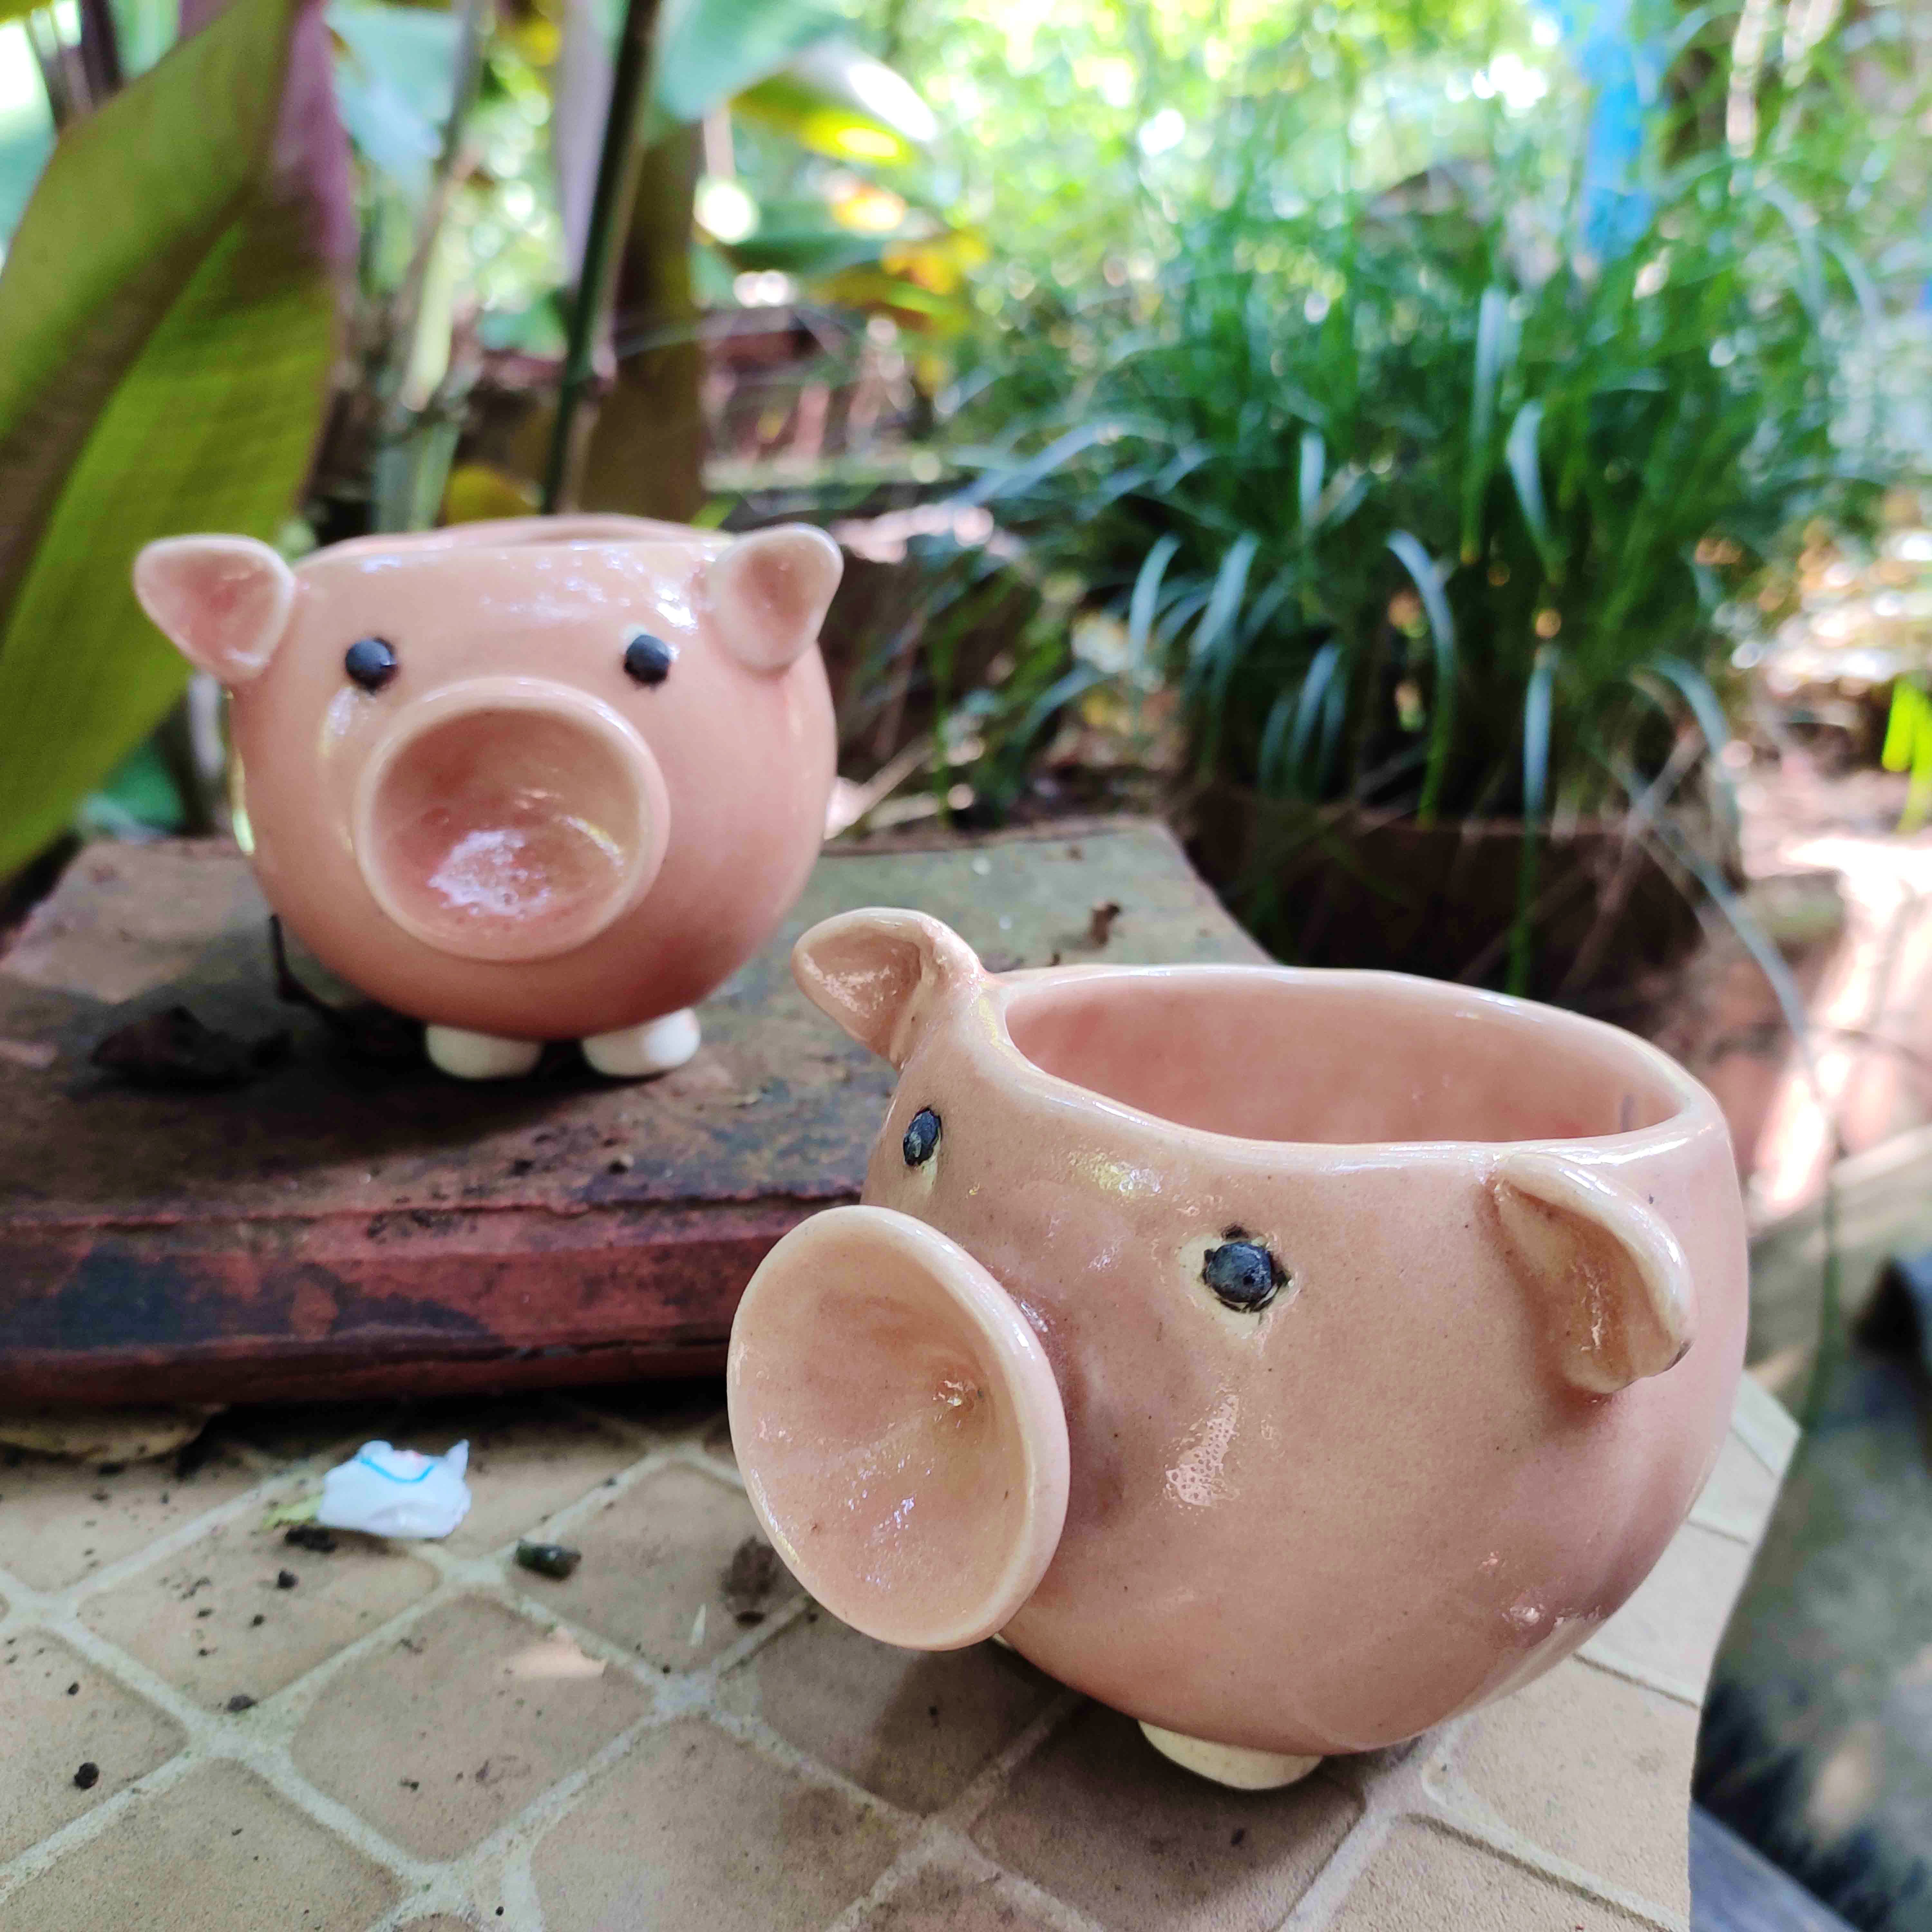 Domestic pig,Flowerpot,Pottery,Pink,Saving,Ceramic,Suidae,Piggy bank,Snout,Clay